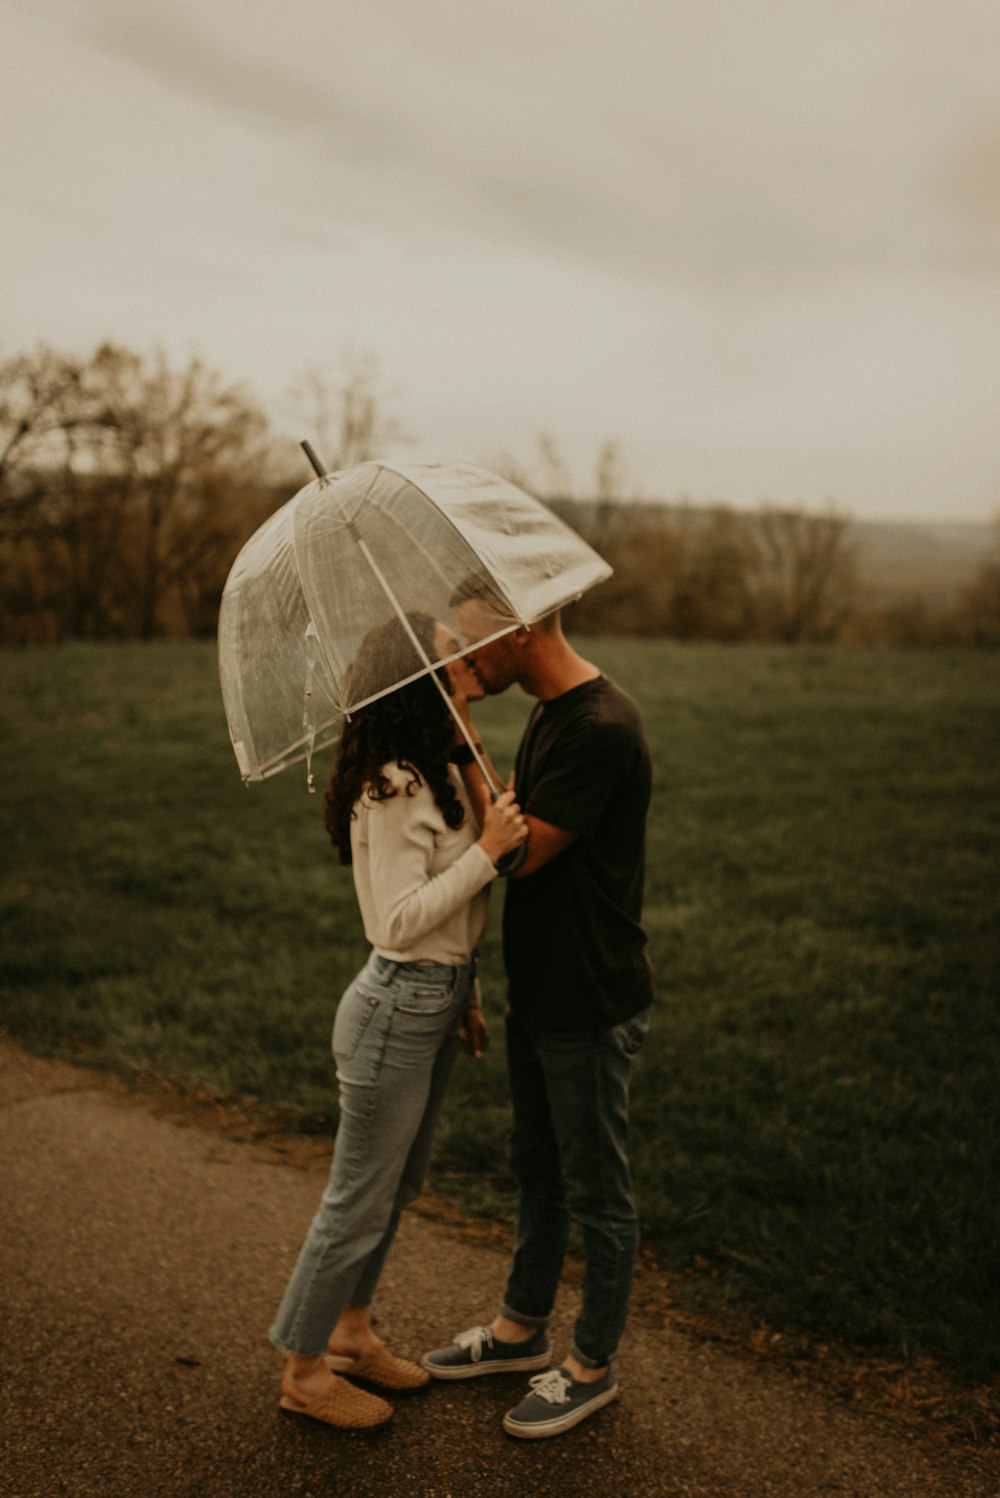 man and woman holding umbrella walking on green grass field during daytime